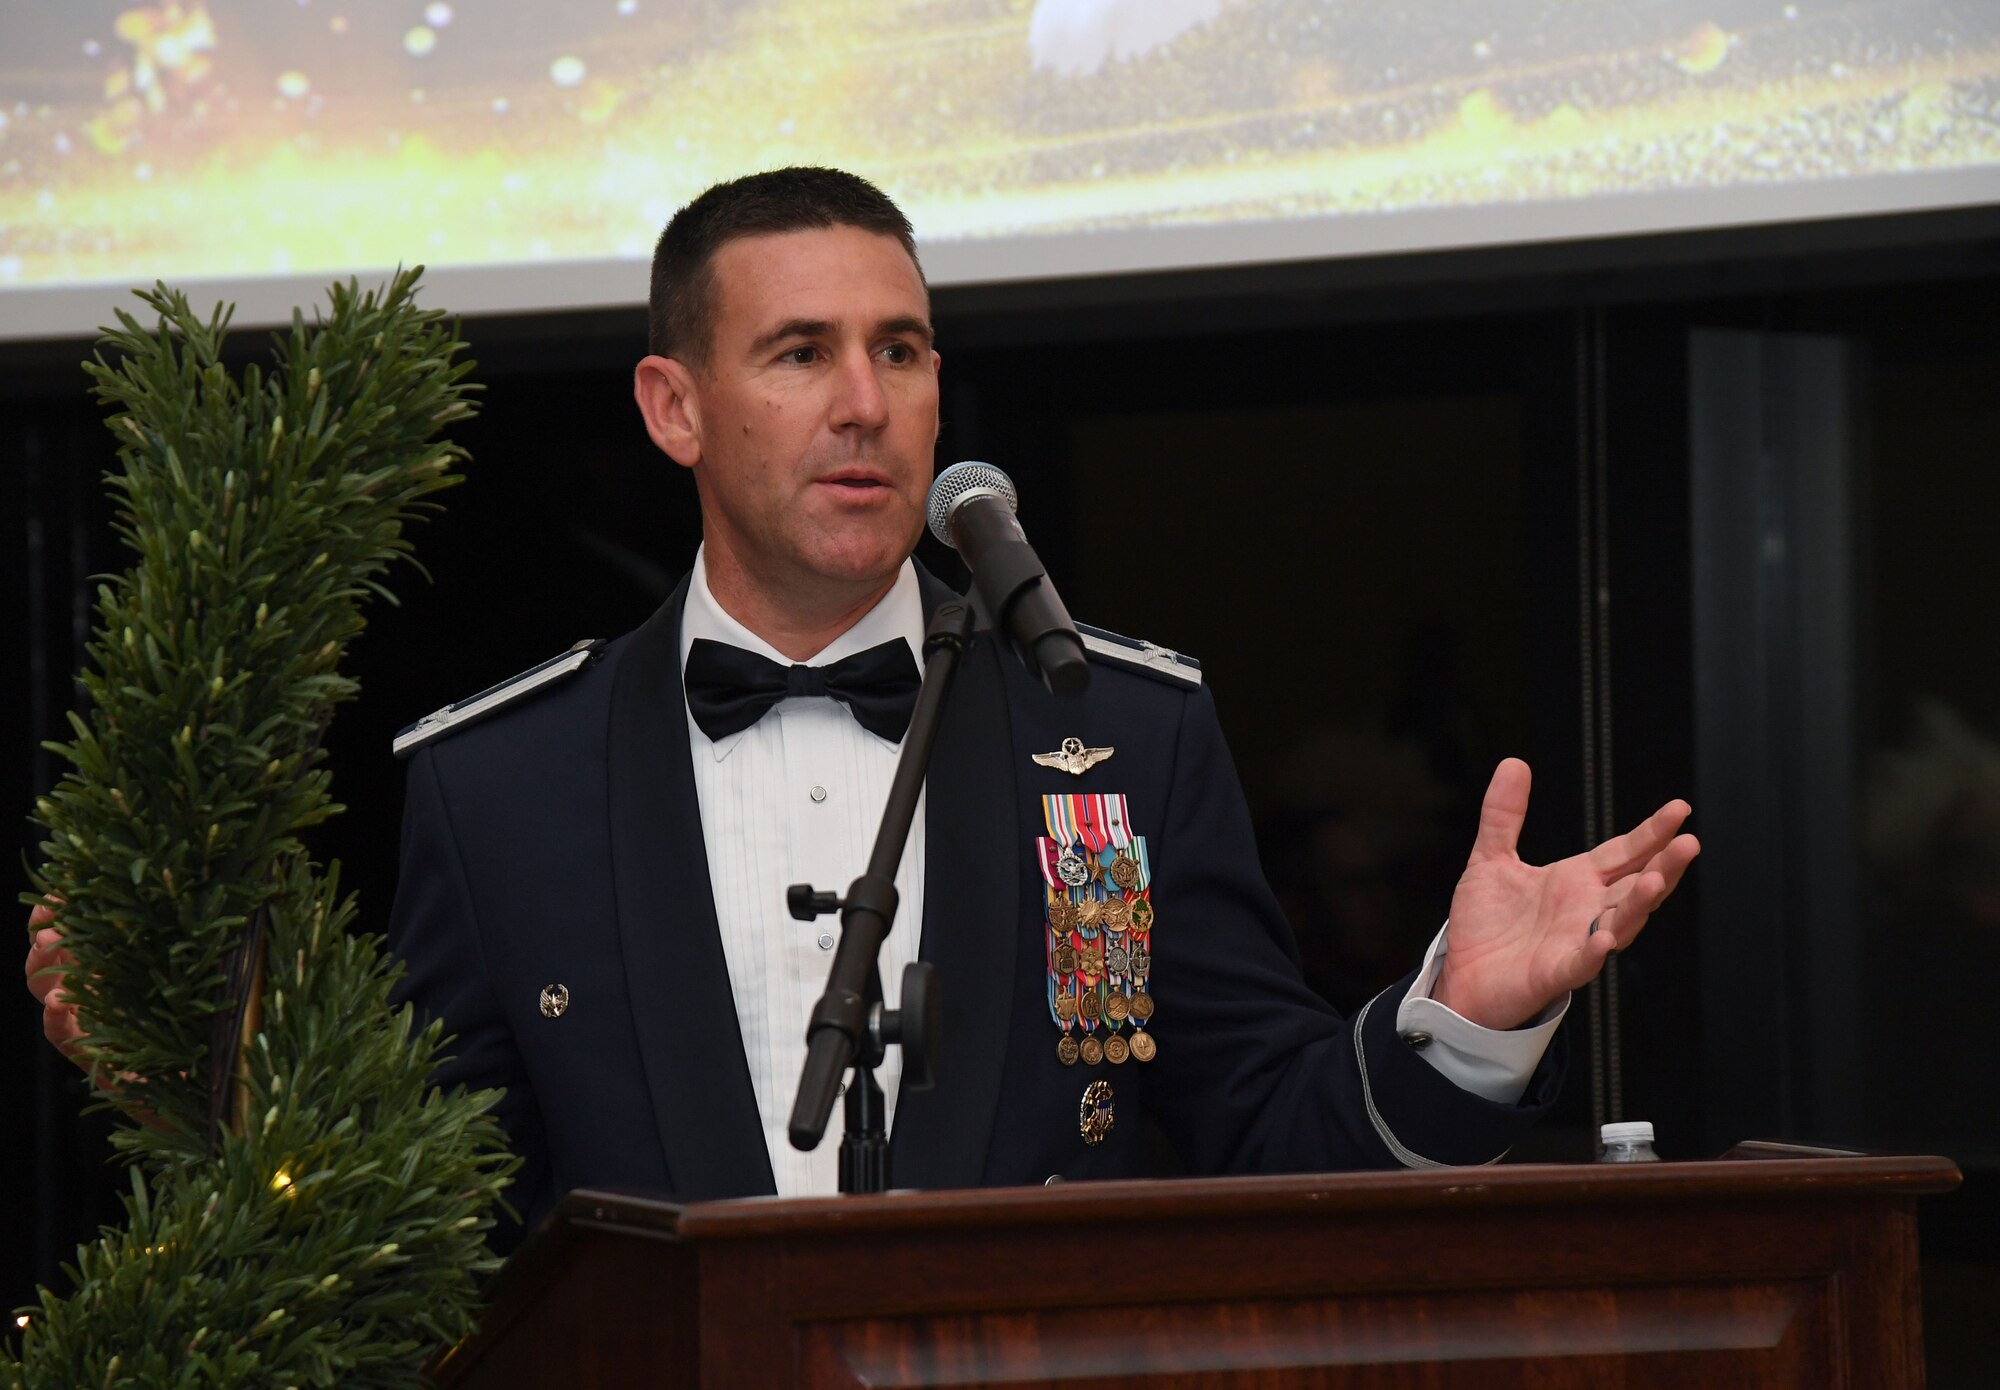 U.S. Air Force Col. Jason Allen, 81st Training Wing commander, delivers remarks during the 81st Training Wing's 2022 Annual Awards Ceremony inside the Bay Breeze Event Center at Keesler Air Force Base, Mississippi, Feb. 24, 2023.